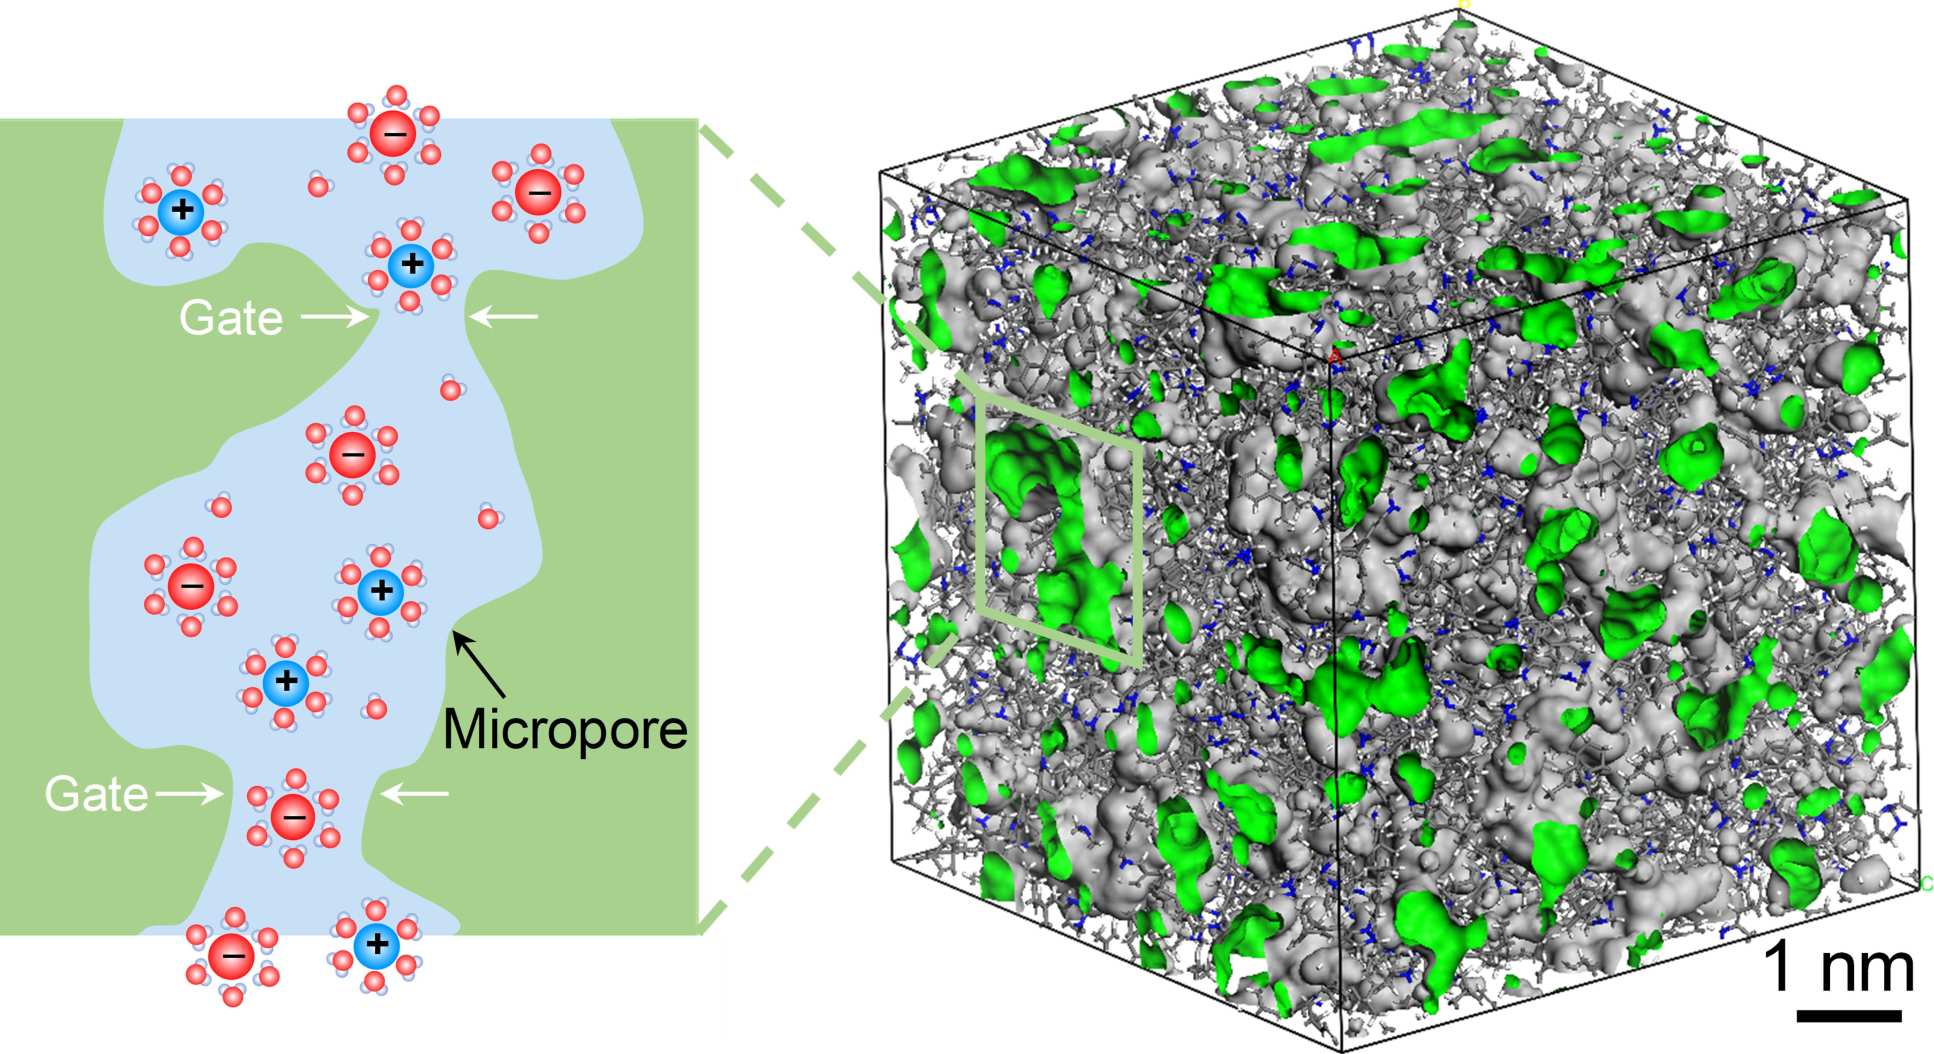 3D image of the membranes and 2D illustration that shows ions passing through 'gates' in the structure